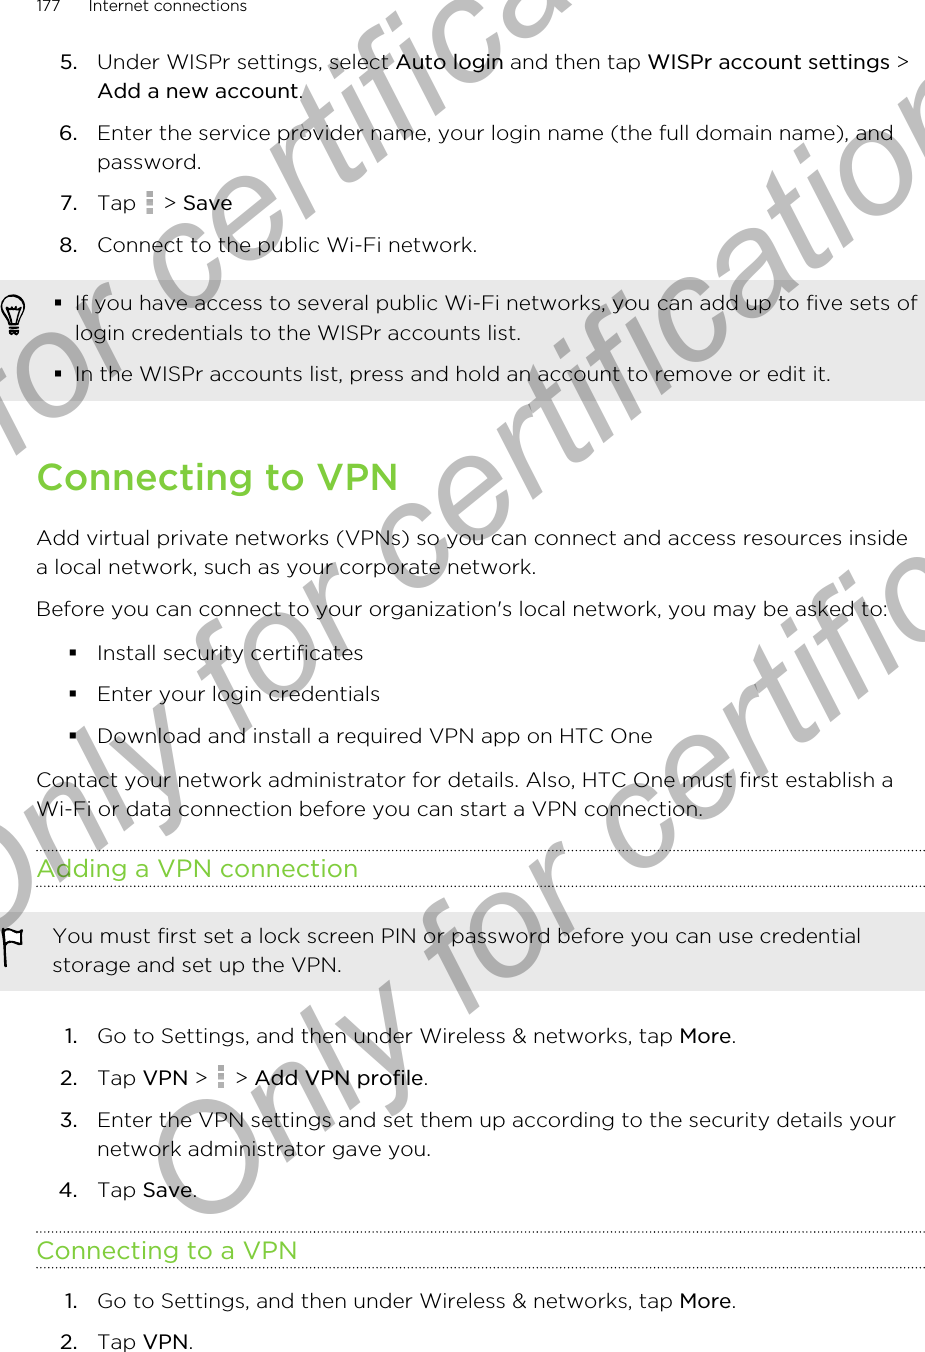 5. Under WISPr settings, select Auto login and then tap WISPr account settings &gt;Add a new account.6. Enter the service provider name, your login name (the full domain name), andpassword.7. Tap   &gt; Save8. Connect to the public Wi-Fi network.§If you have access to several public Wi-Fi networks, you can add up to five sets oflogin credentials to the WISPr accounts list.§In the WISPr accounts list, press and hold an account to remove or edit it.Connecting to VPNAdd virtual private networks (VPNs) so you can connect and access resources insidea local network, such as your corporate network.Before you can connect to your organization&apos;s local network, you may be asked to:§Install security certificates§Enter your login credentials§Download and install a required VPN app on HTC OneContact your network administrator for details. Also, HTC One must first establish aWi-Fi or data connection before you can start a VPN connection.Adding a VPN connectionYou must first set a lock screen PIN or password before you can use credentialstorage and set up the VPN.1. Go to Settings, and then under Wireless &amp; networks, tap More.2. Tap VPN &gt;   &gt; Add VPN profile.3. Enter the VPN settings and set them up according to the security details yournetwork administrator gave you.4. Tap Save.Connecting to a VPN1. Go to Settings, and then under Wireless &amp; networks, tap More.2. Tap VPN.177 Internet connectionsOnly for certification  Only for certification  Only for certification